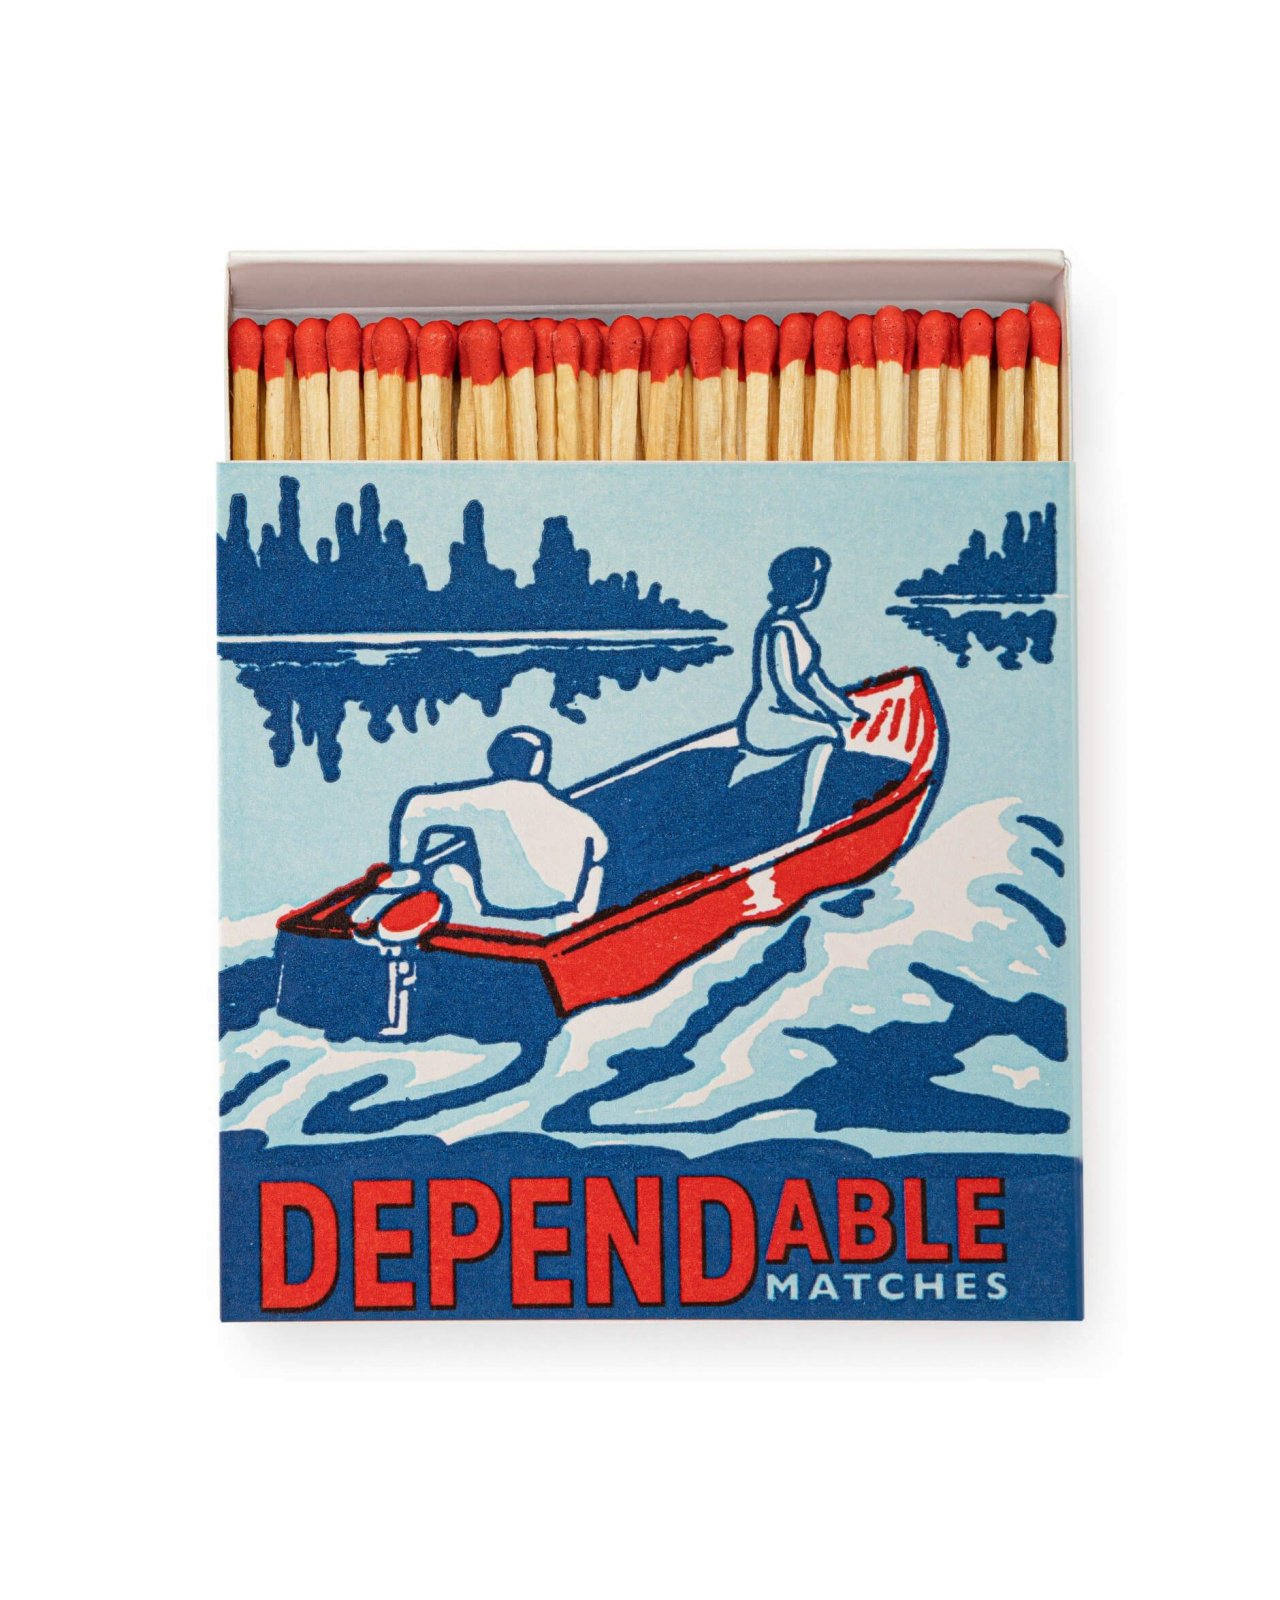 Dependable Matches